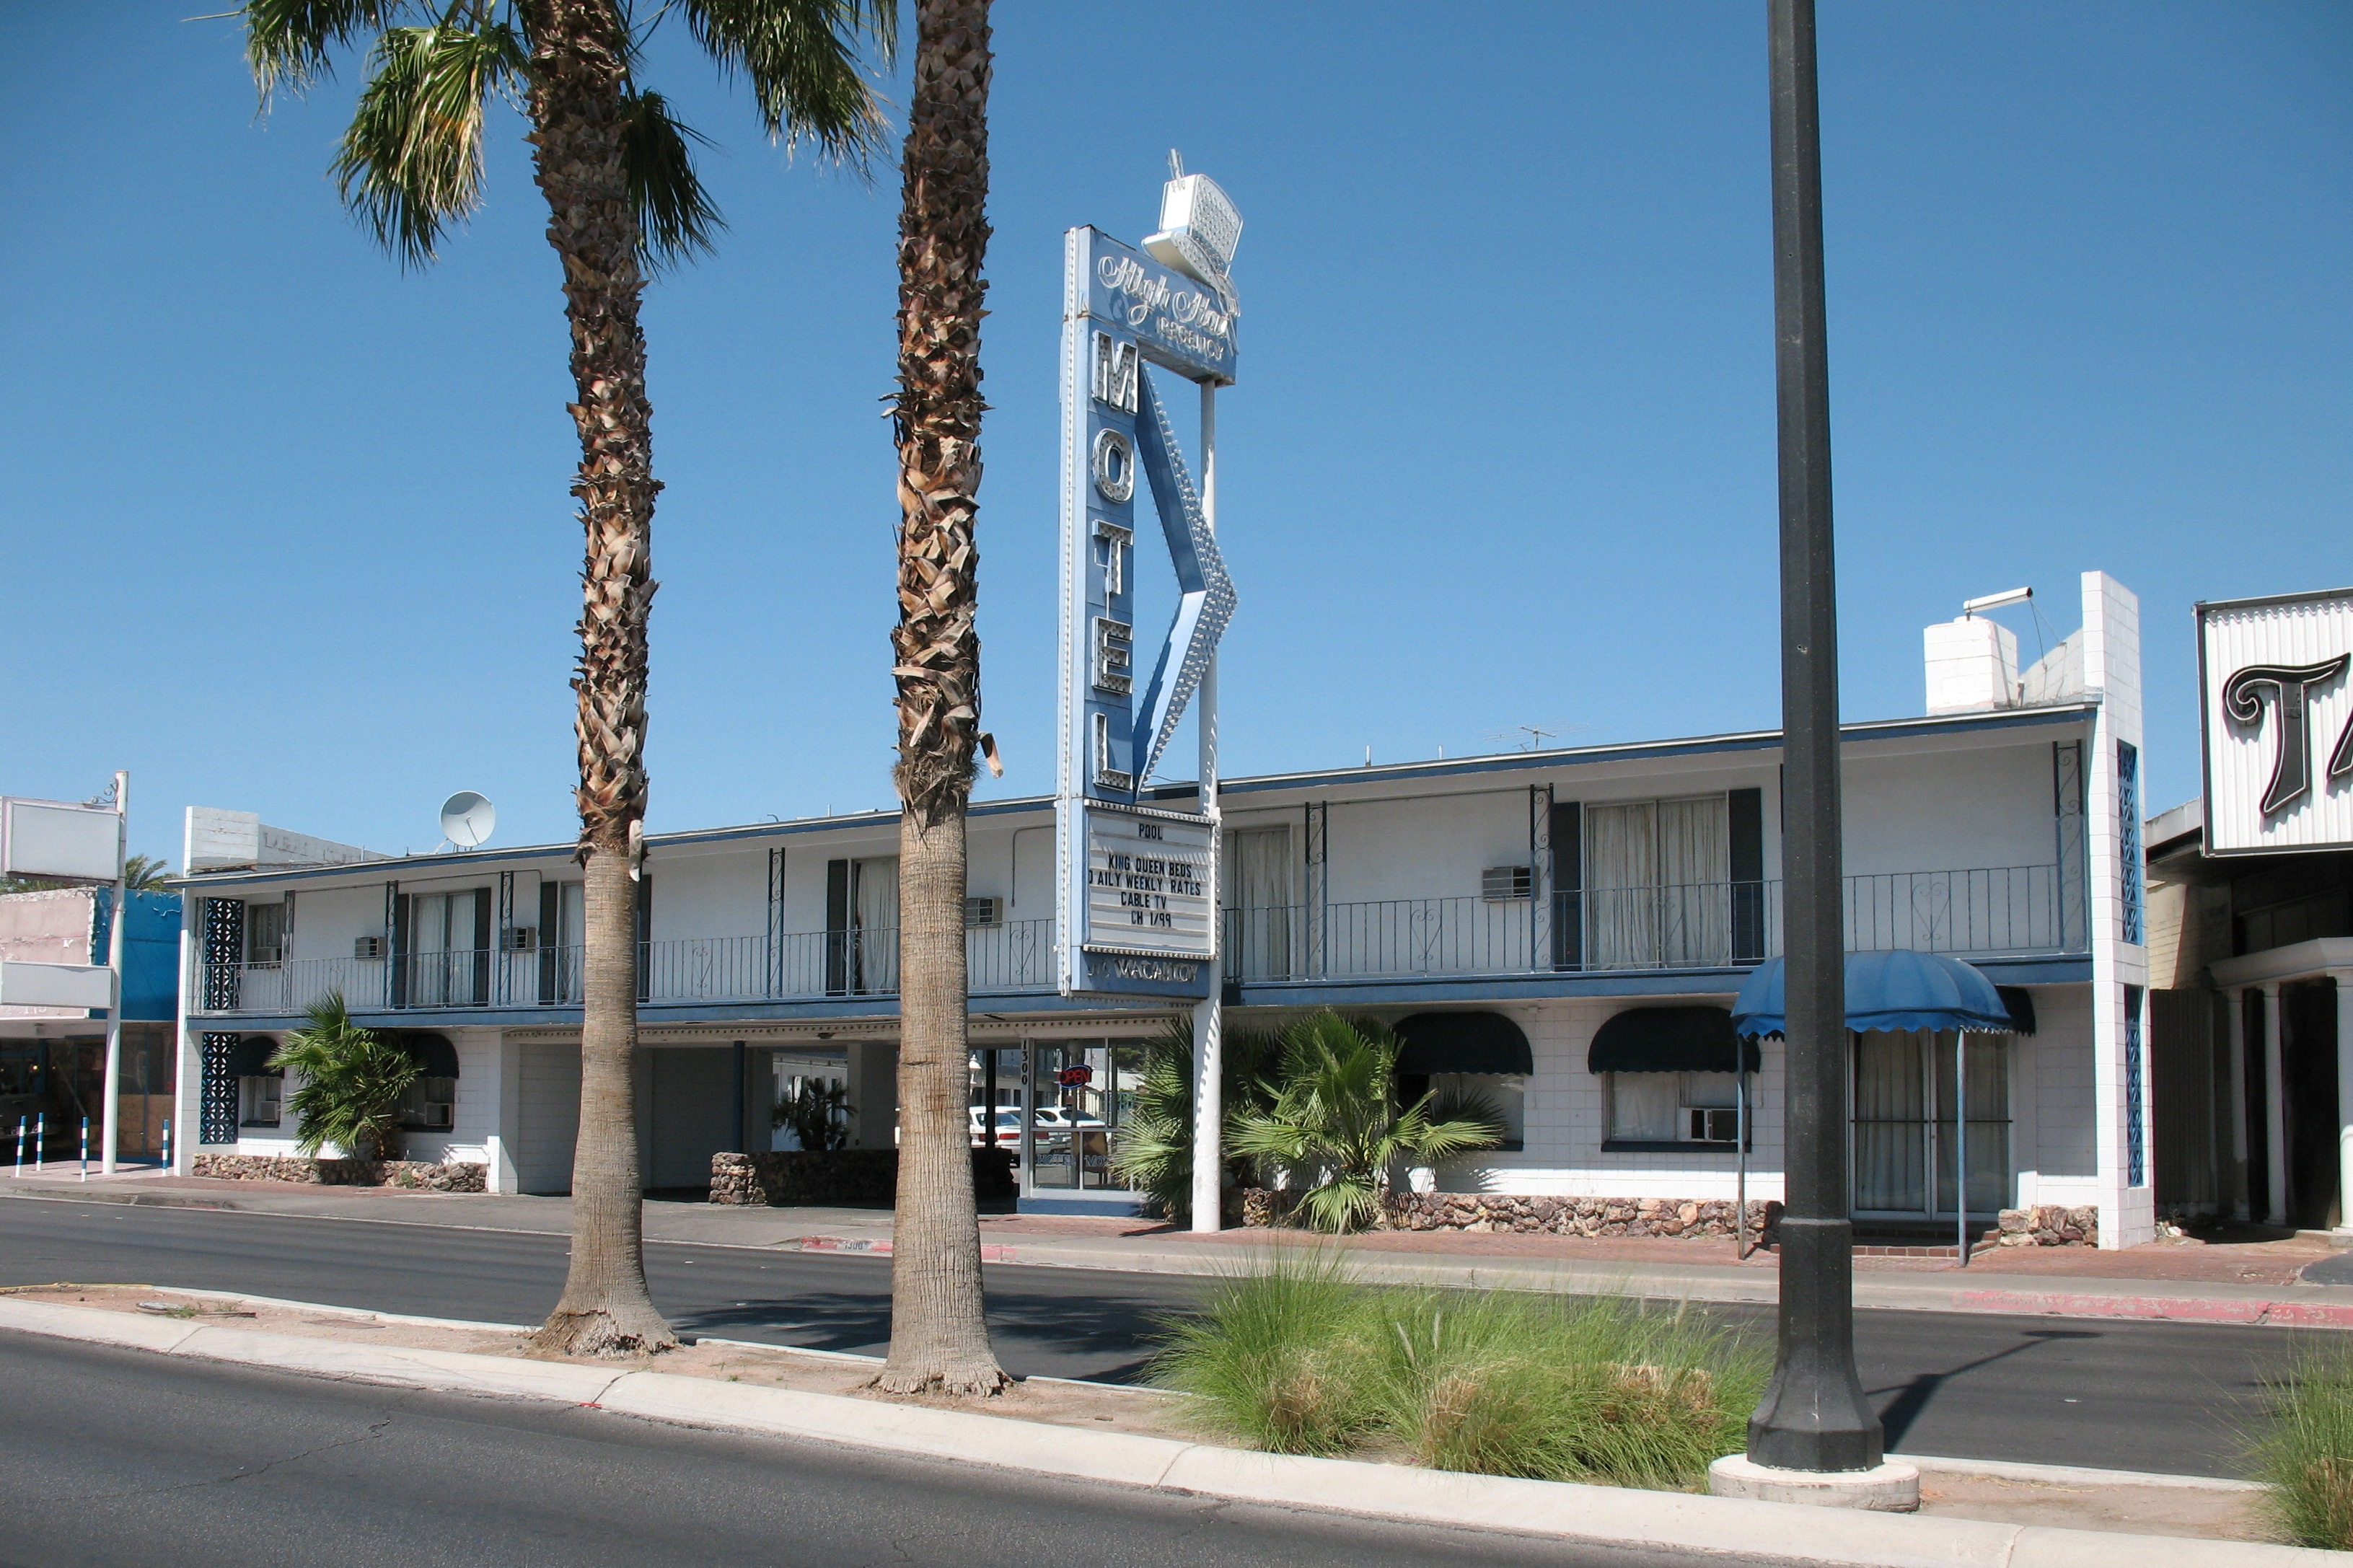 The Strip - Las Vegas Motels - Then and Now